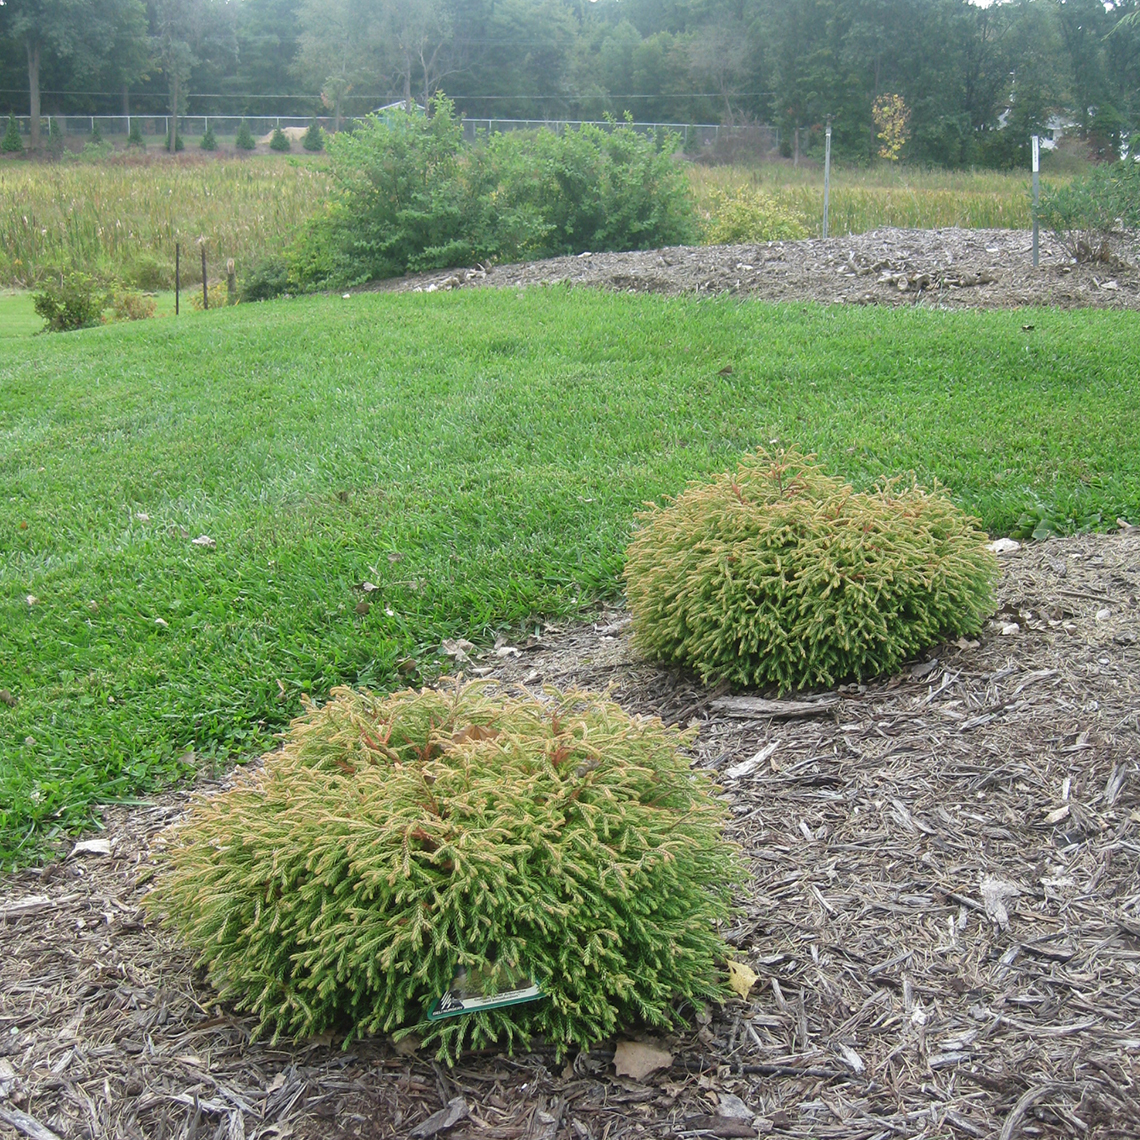 Two pincushion like Golden Tuffet arborvitae growing in a landscape